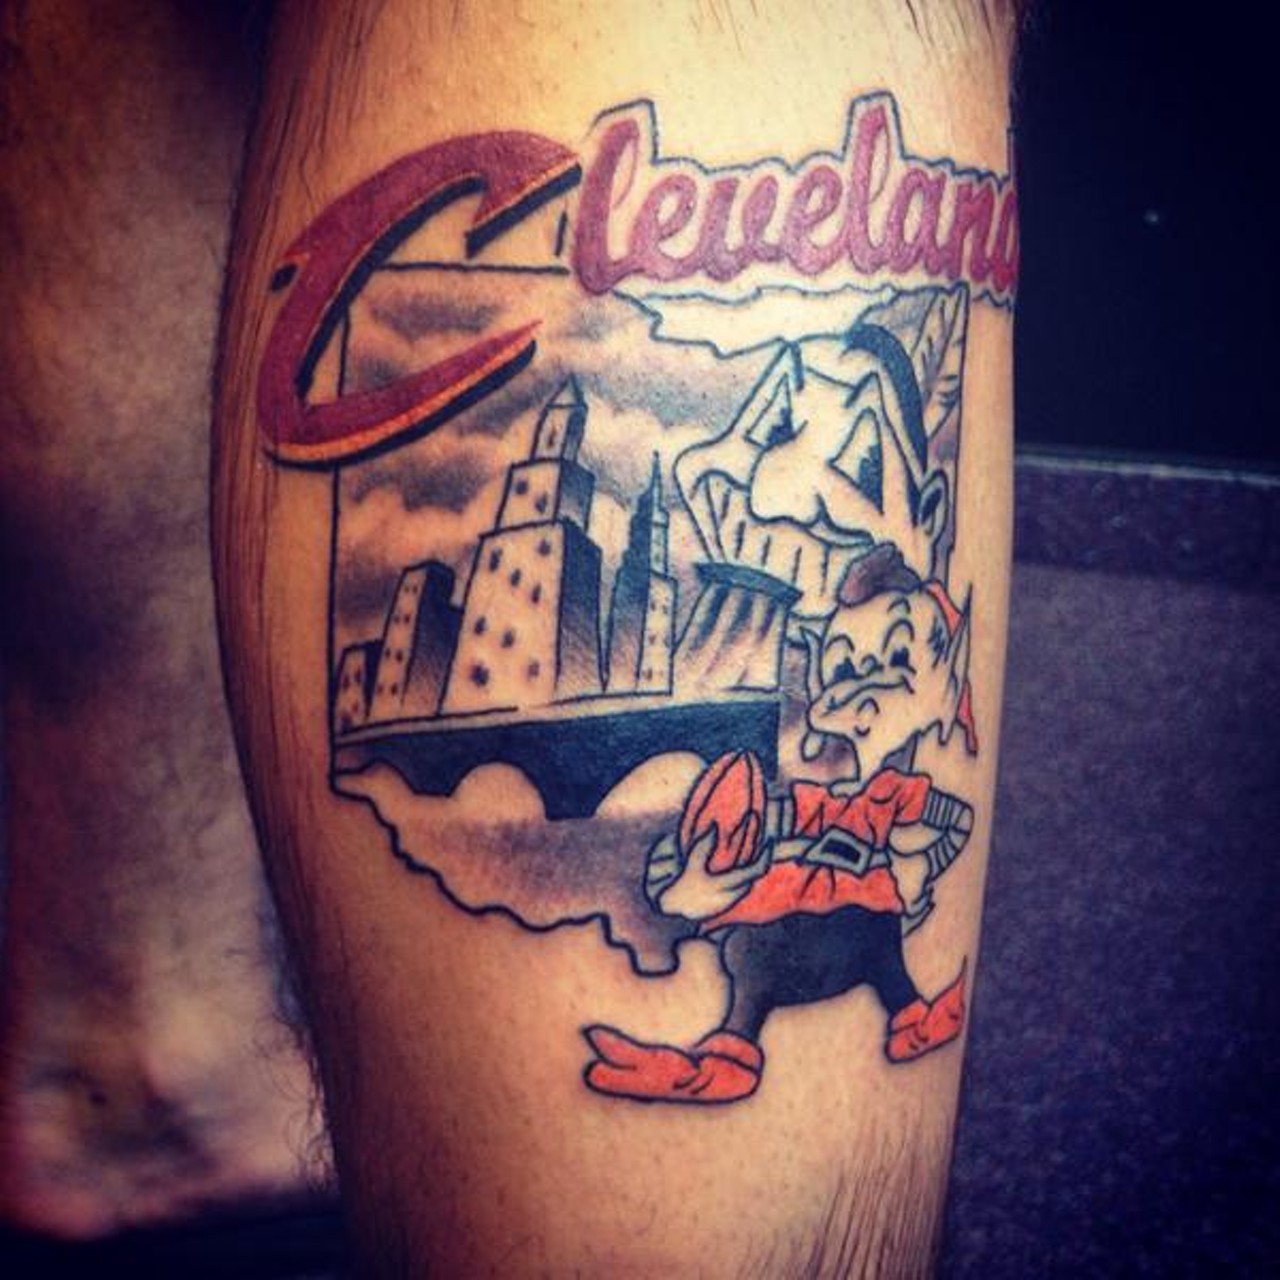 This tattoo encompasses what it means to be a Cleveland sports fan. The use of color and black and white ink makes this tat pop (Photo courtesy of Instagram user @MarronMatt).